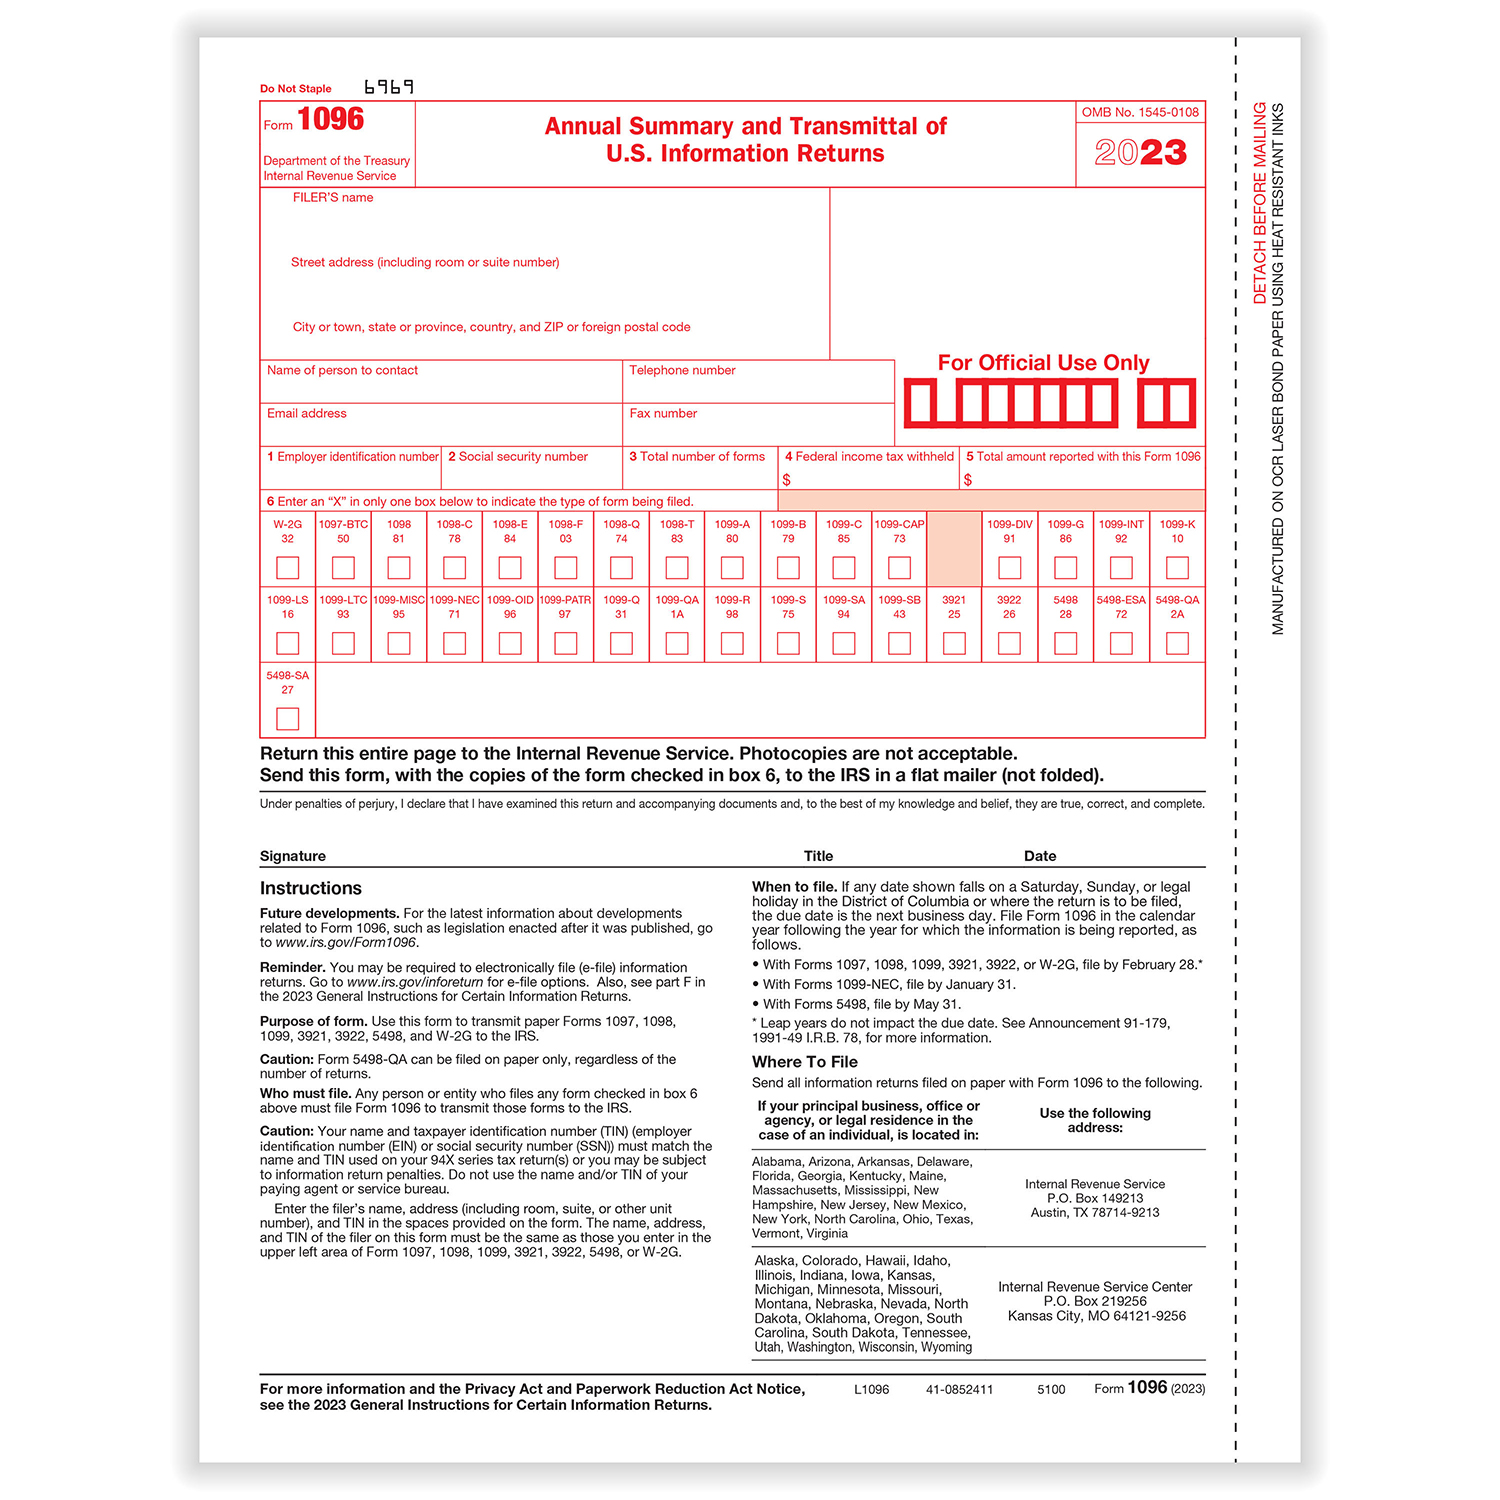 Picture of 1096 Transmittal & Annual Summary Form